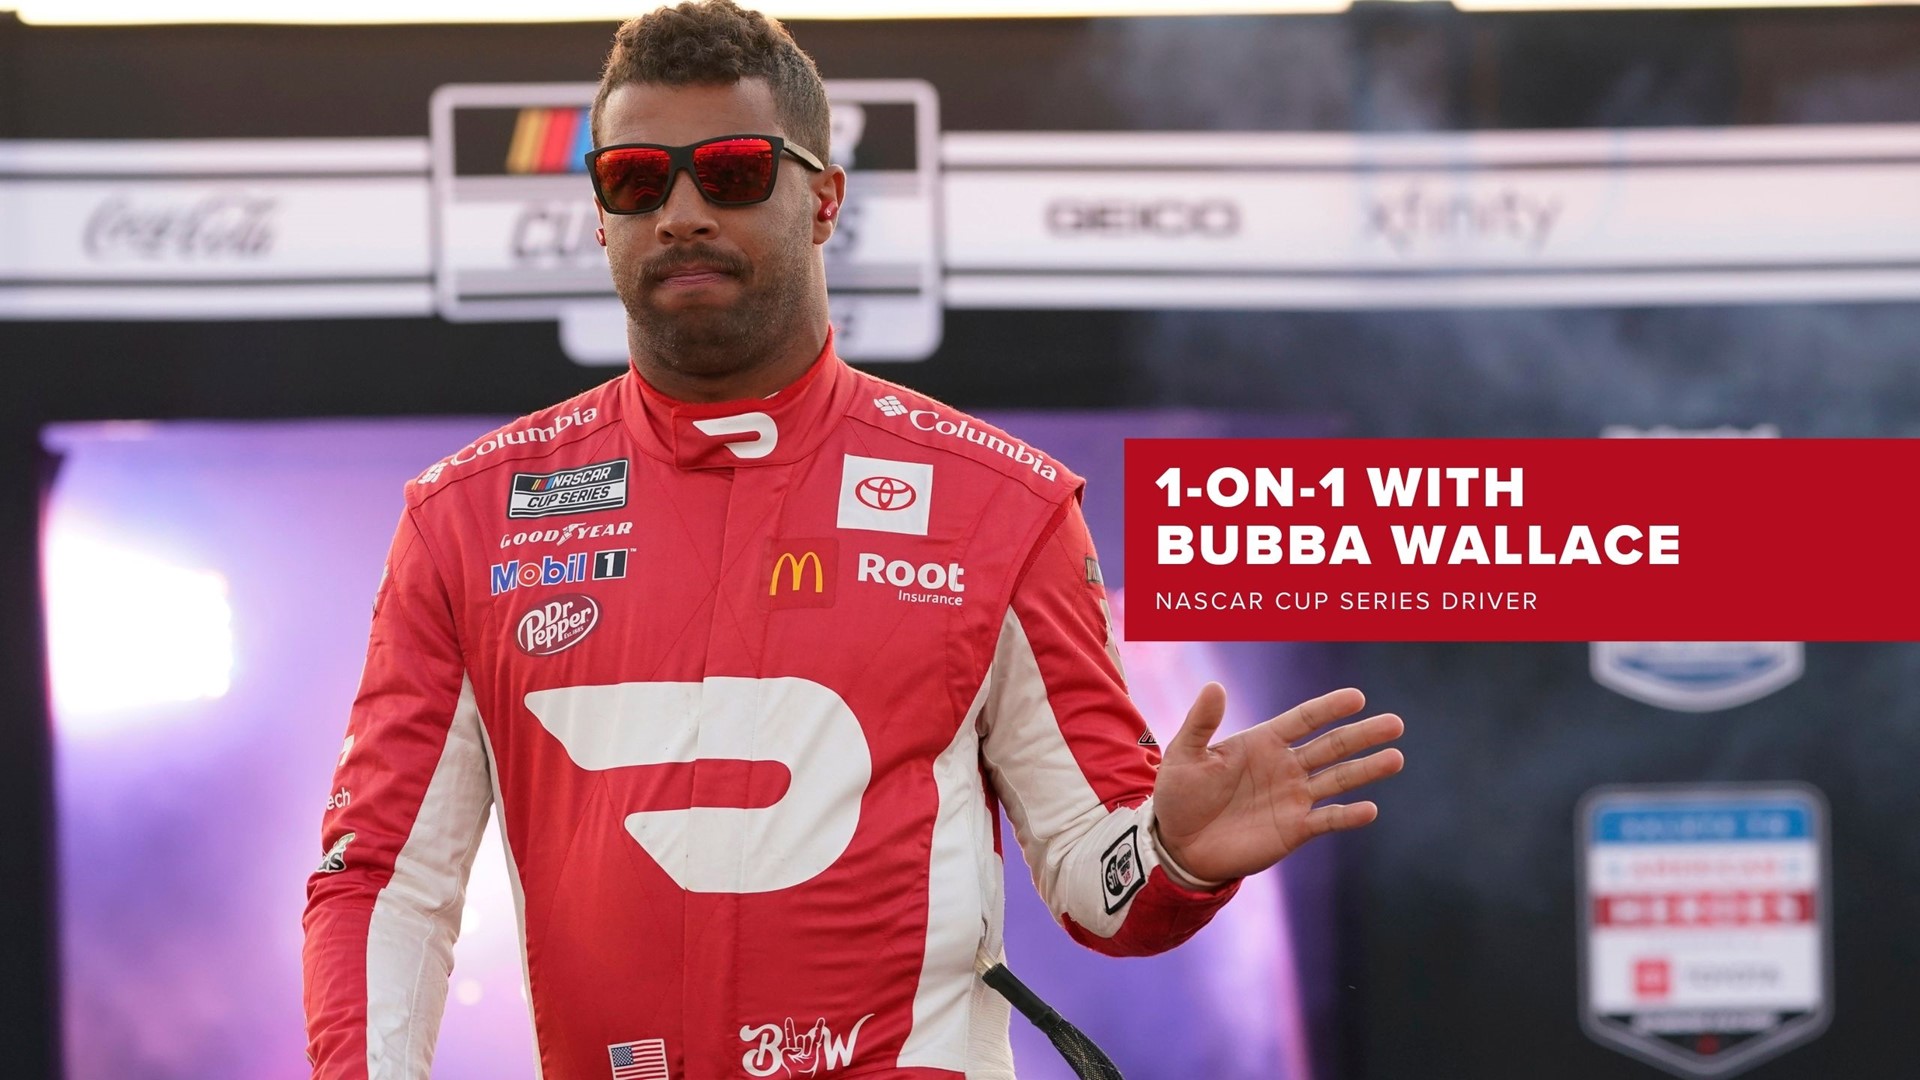 NASCAR Cup Series driver Bubba Wallace reflects on driving for Michael Jordan, the pressure of being the only Black driver in the Cup Series and the joy of winning.